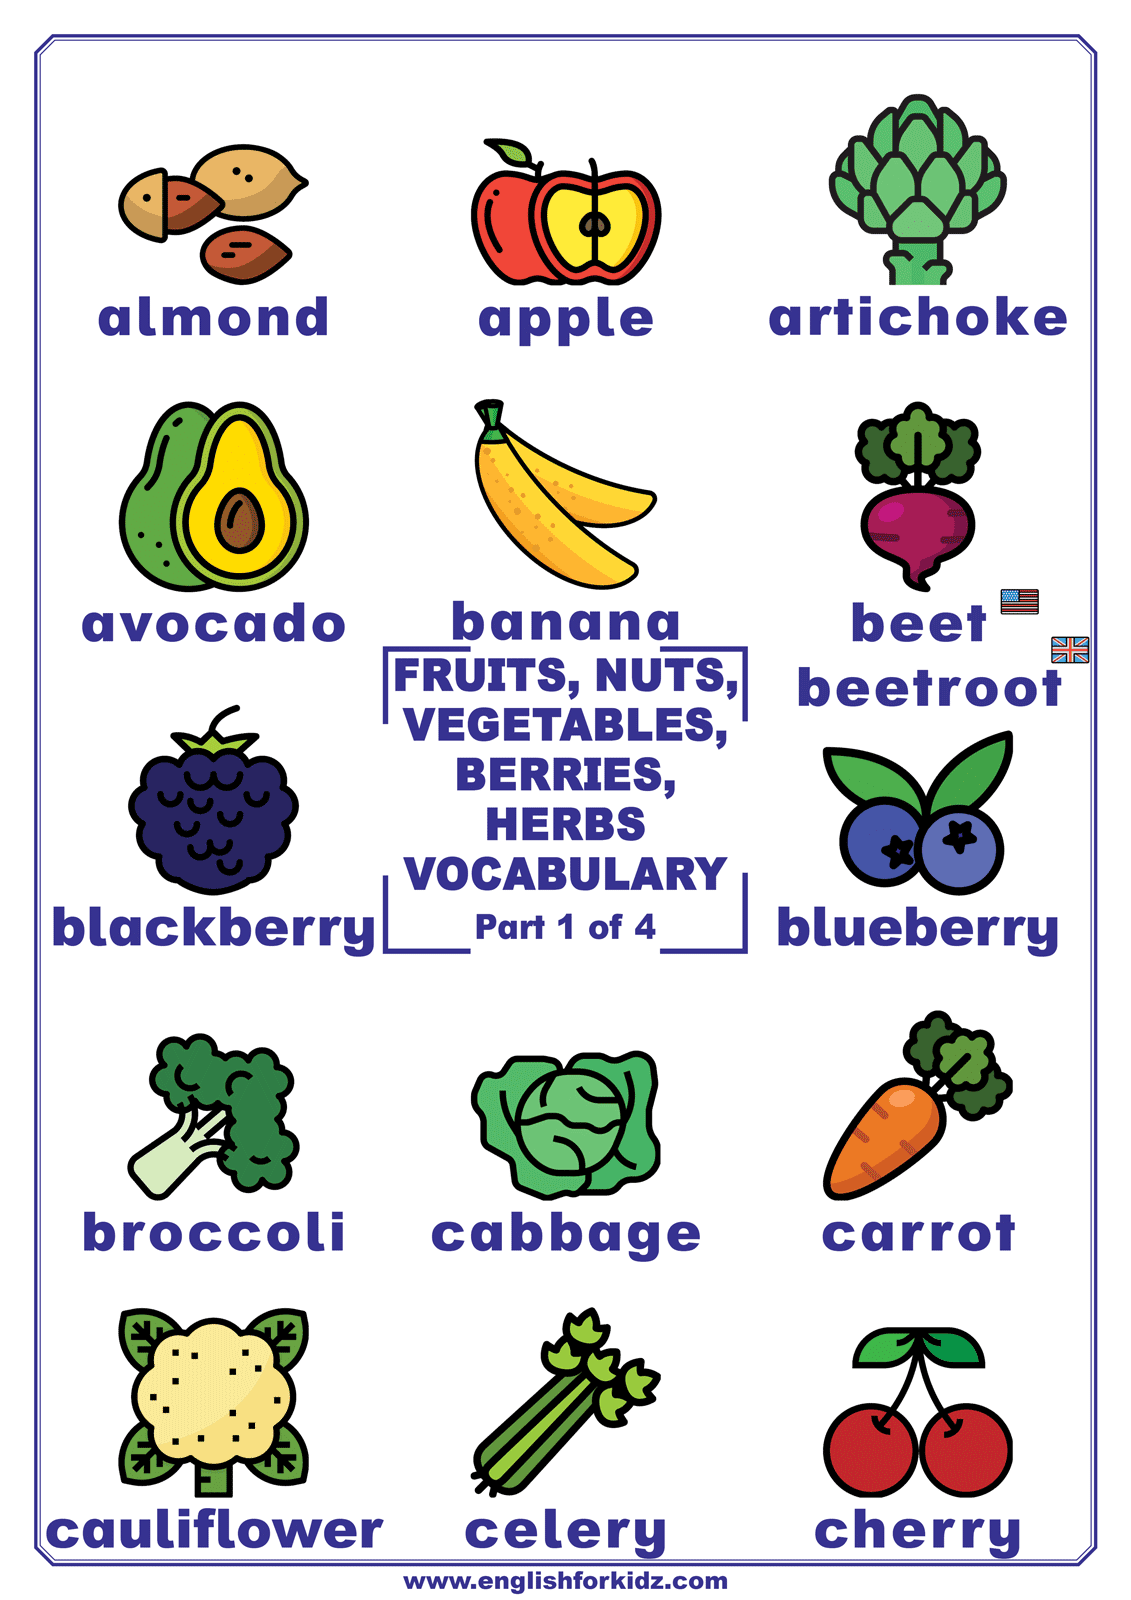 Vegetables vocabulary. Fruit and Vegetables Vocabulary. Vegetables Vocabulary English. Fruits and Vegetables Vocabulary in English. Berries на английском Vocabulary.